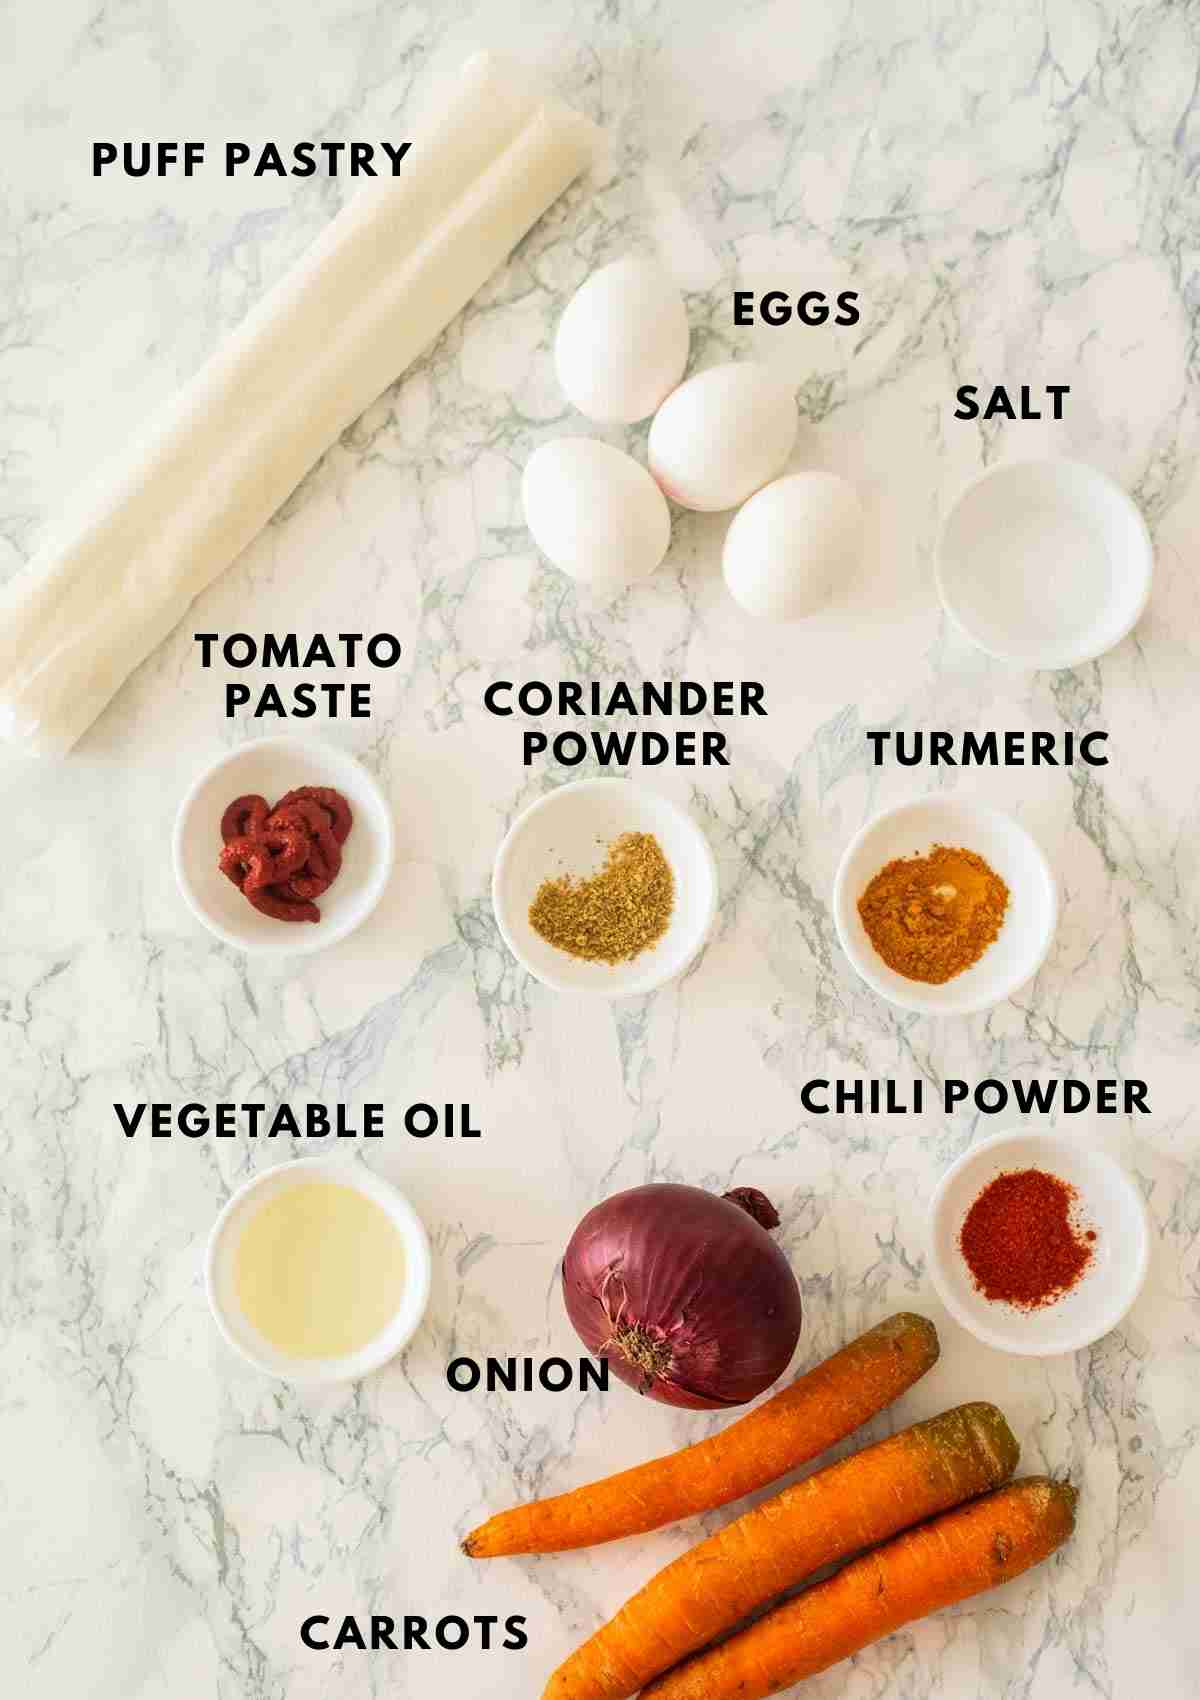 All the ingredients for making egg puffs 